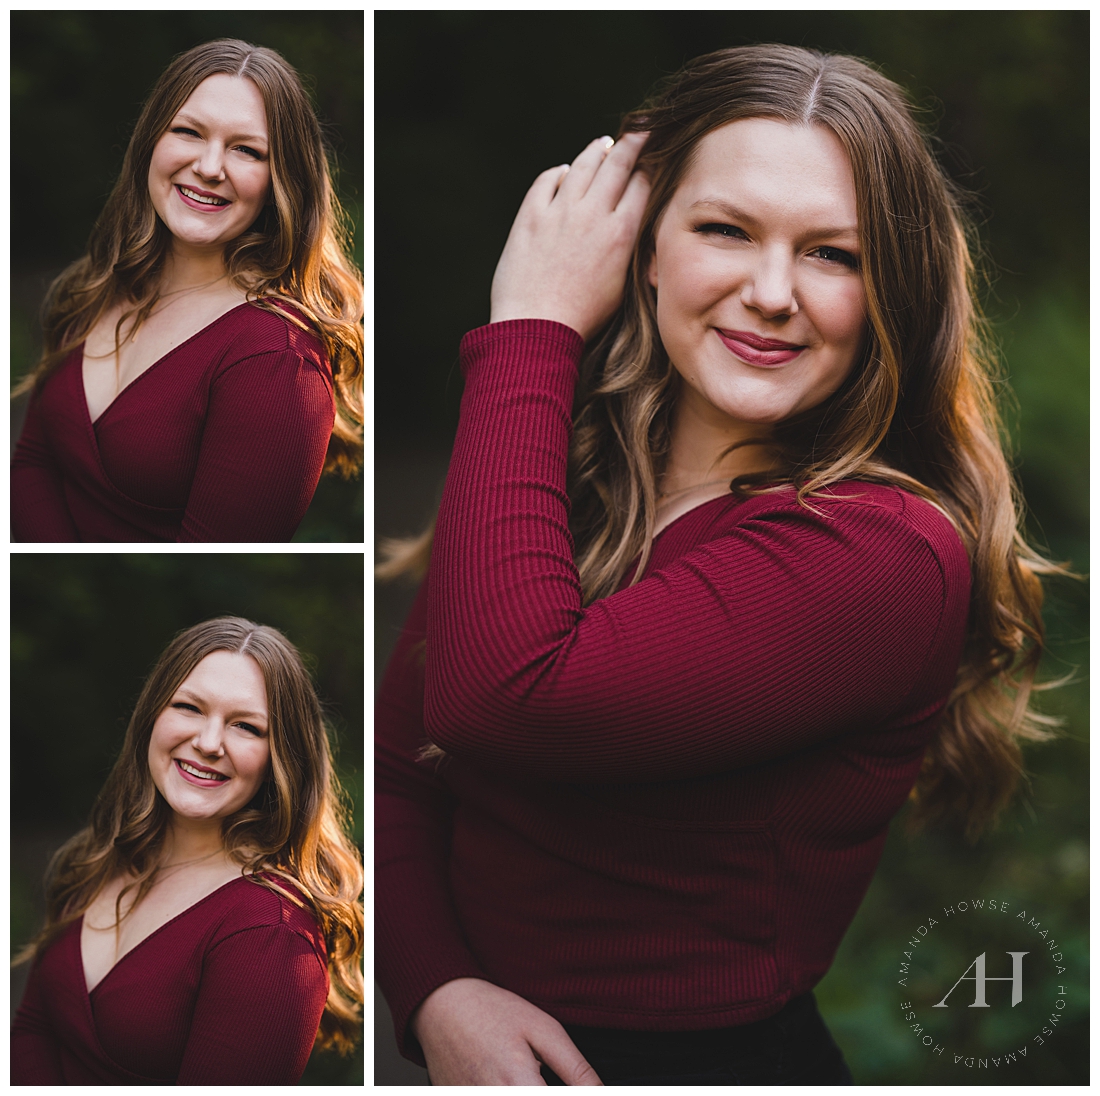 Fall Senior Portraits | Maroon Long-Sleeve Outfit | Photographed by the Best Tacoma Senior Photographer Amanda Howse Photography